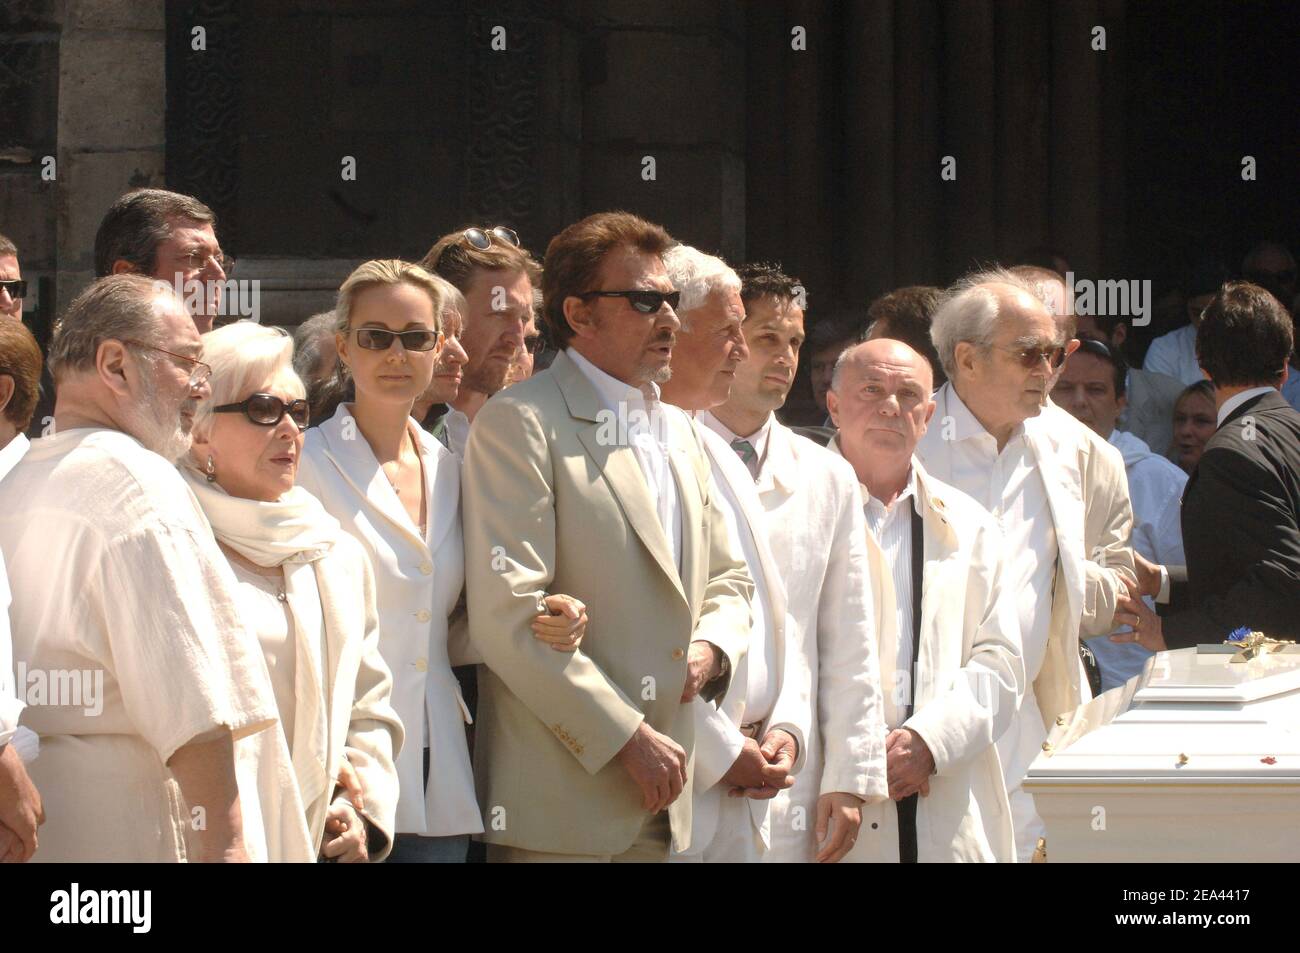 Carlos, Line Renaud, Johnny and wife Laeticia, Stephane Collaro and Michel Legrand at St-Germain-des-Pres church in Paris, France, on May 18, 2005, for a mass to pay a tribute to famous French music producer Eddie Barclay who died aged 84 on last Friday. Photo by Gorassini-Mousse/ABACA Stock Photo